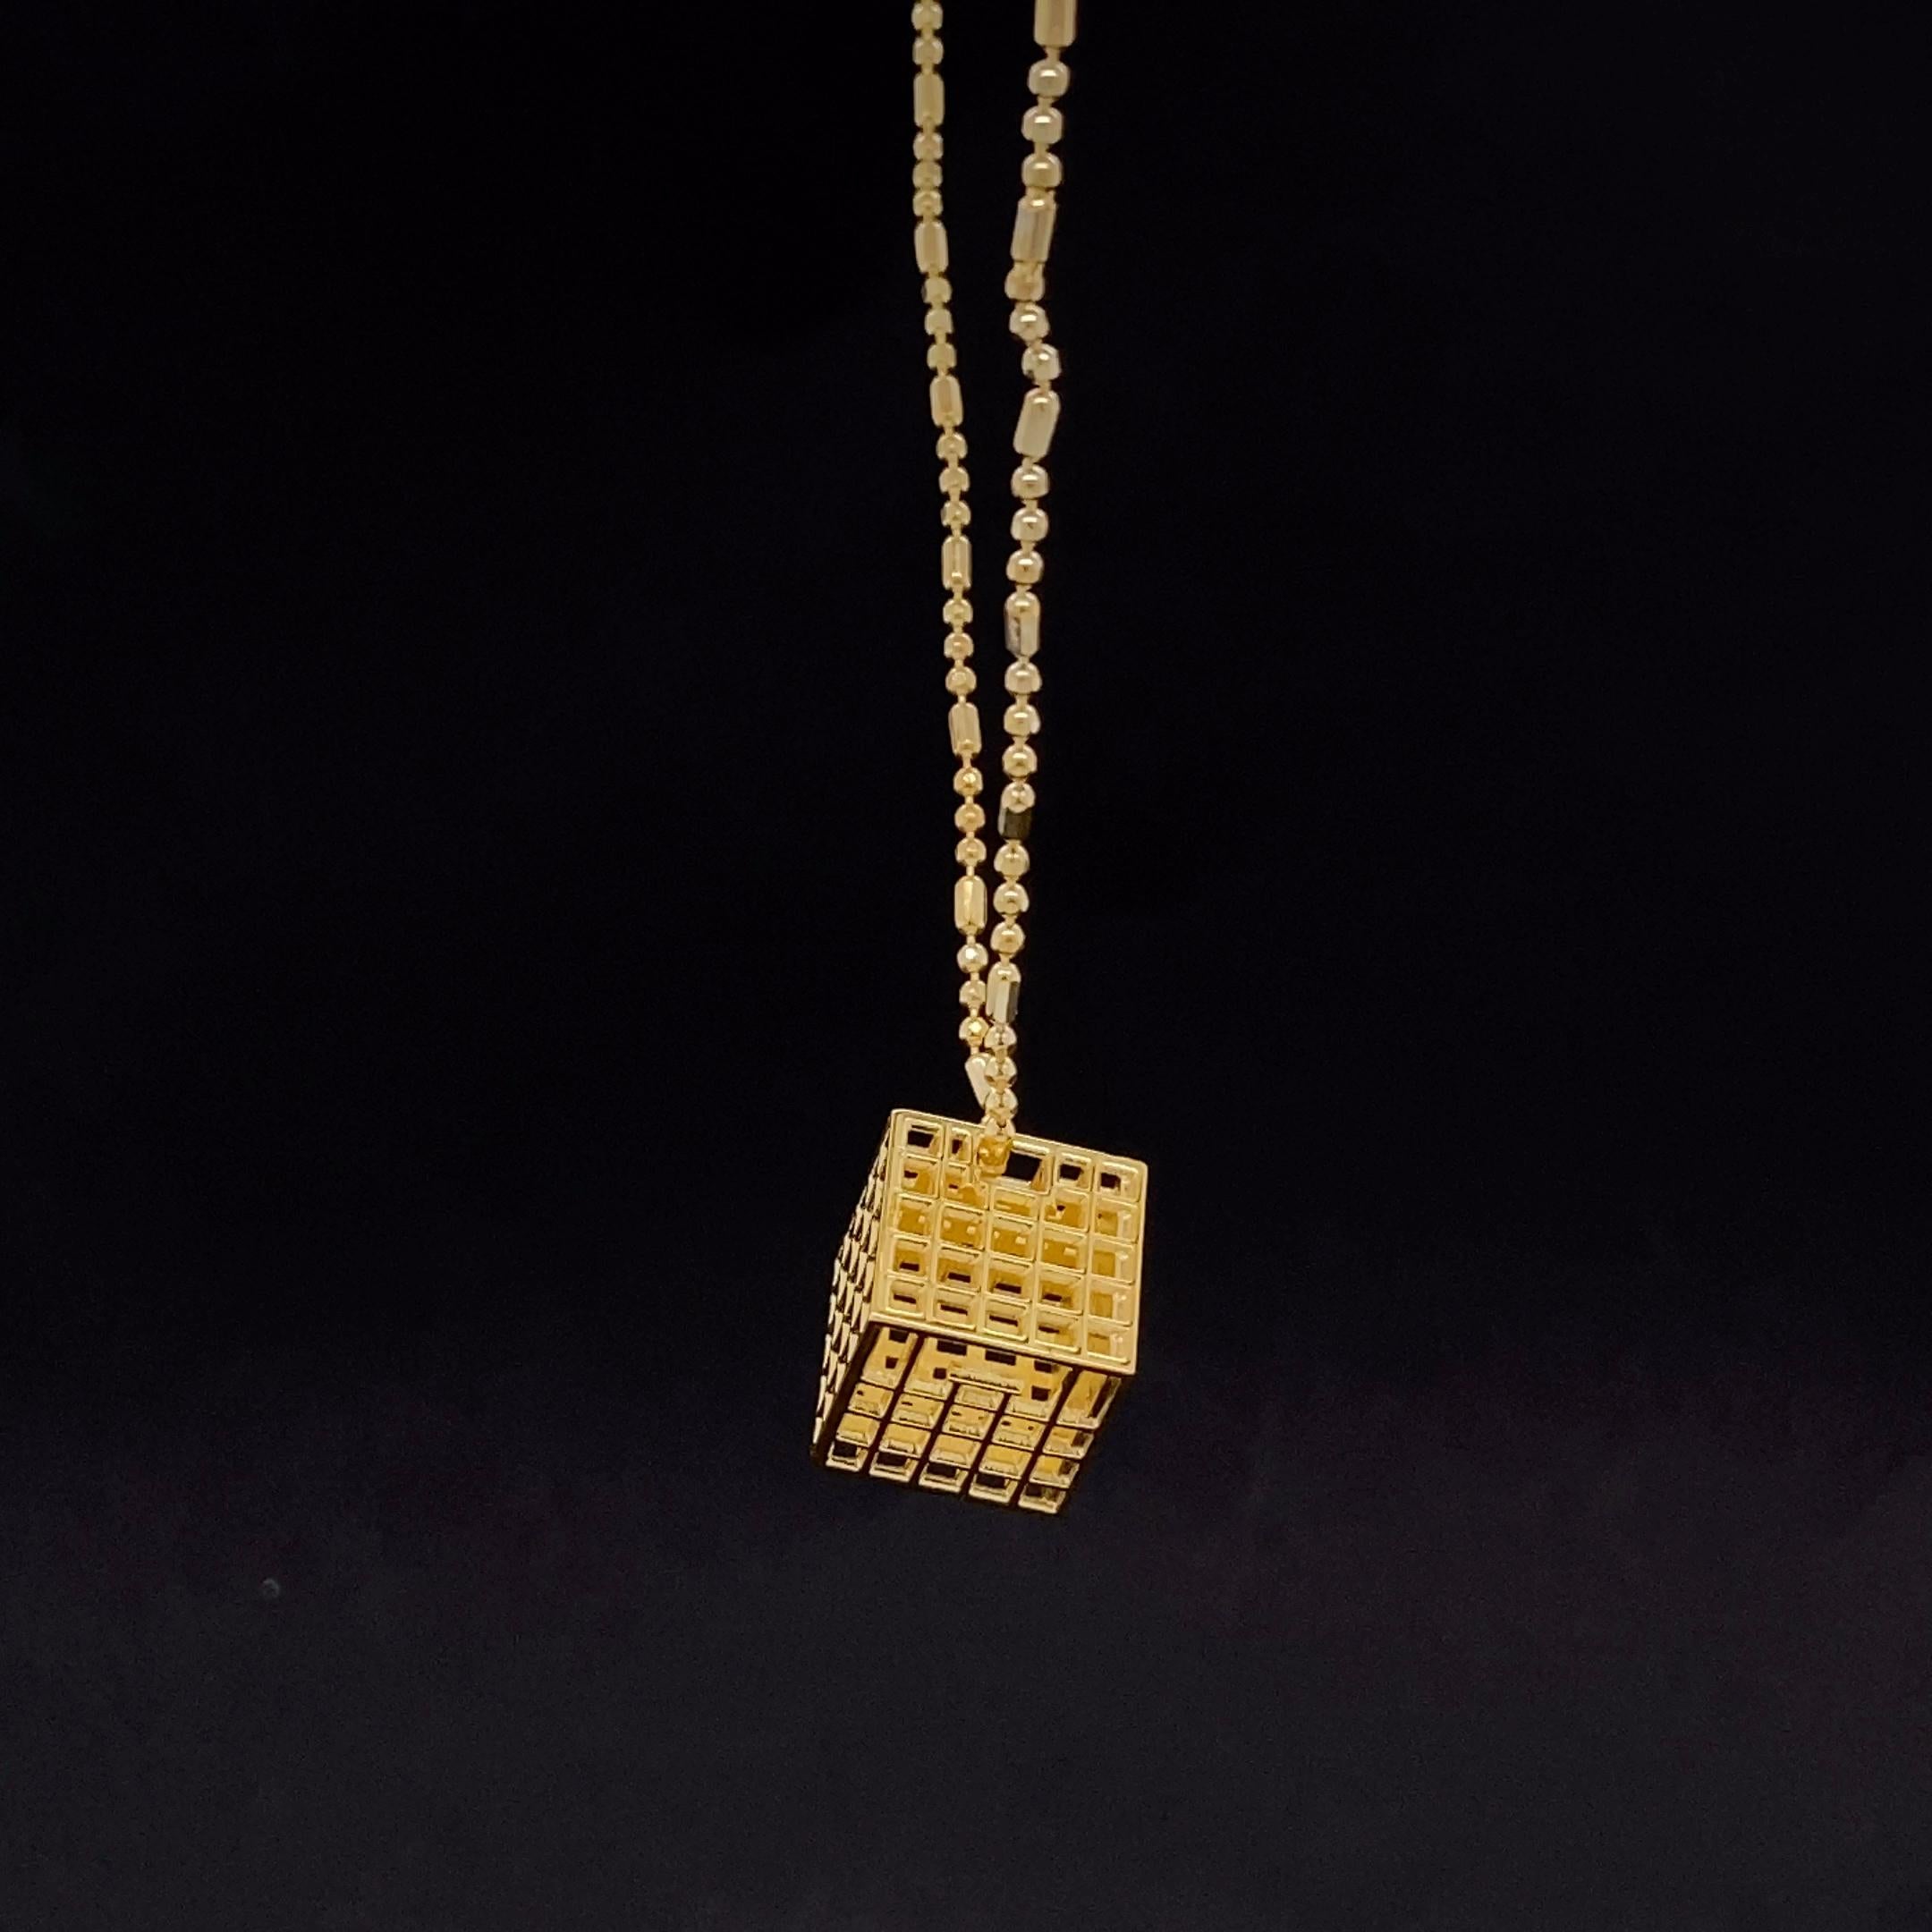 3D Solid Cube Diamond Pendant in 18k Solid Gold For Sale 5